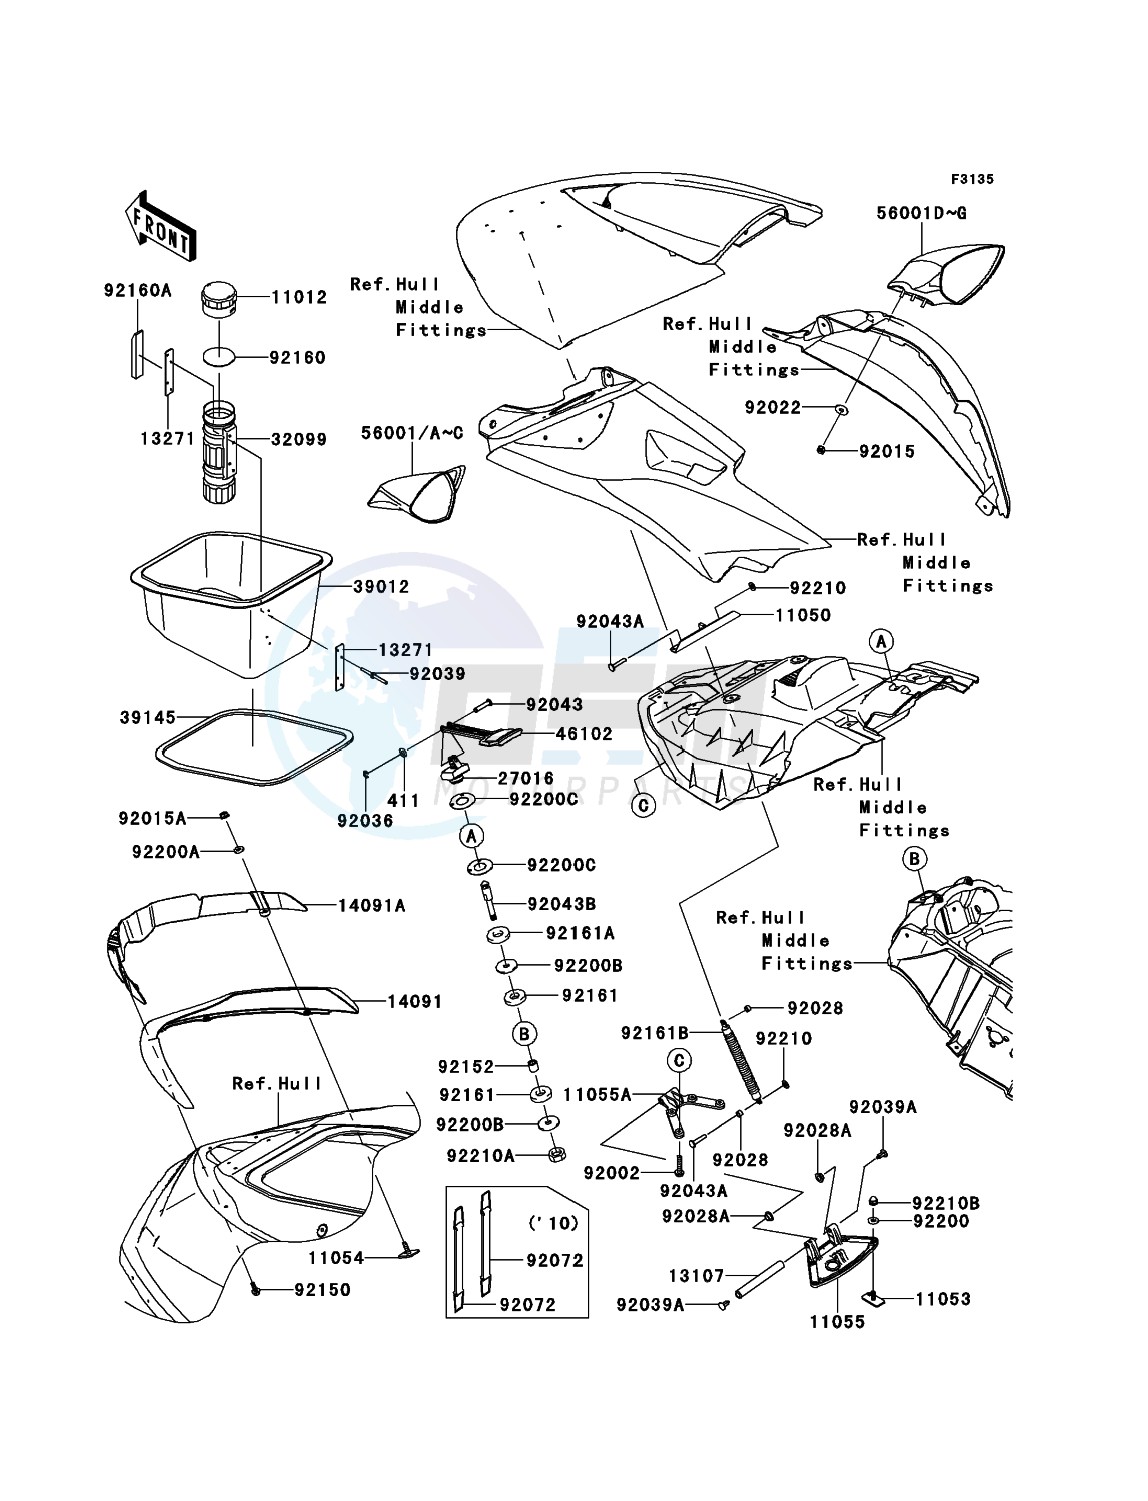 Hull Front Fittings blueprint